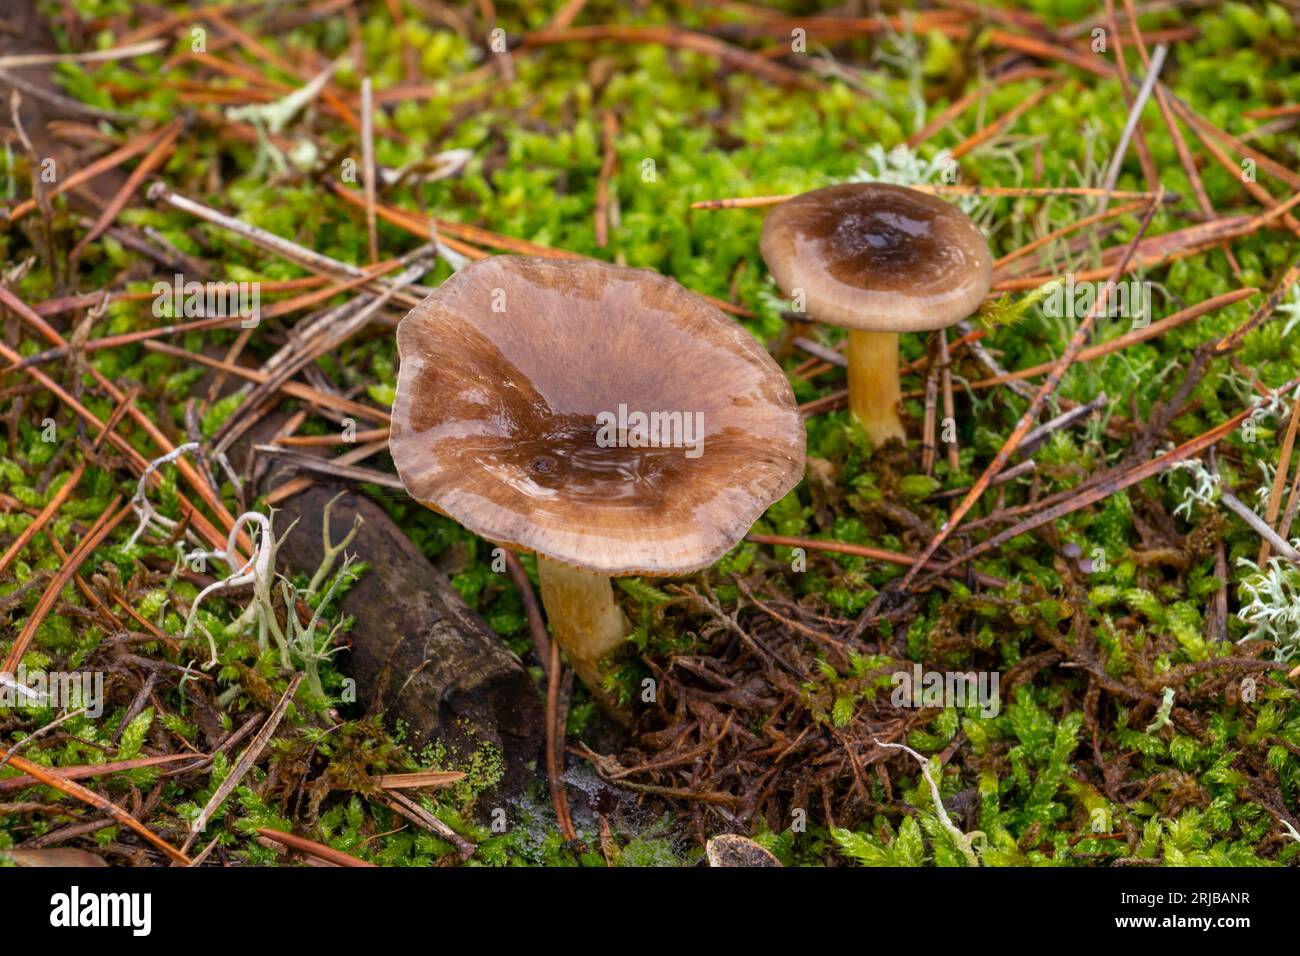 Hygrophorus olivaceoalbus or olive wax cap in the autumn forest, close-up, fall Stock Photo